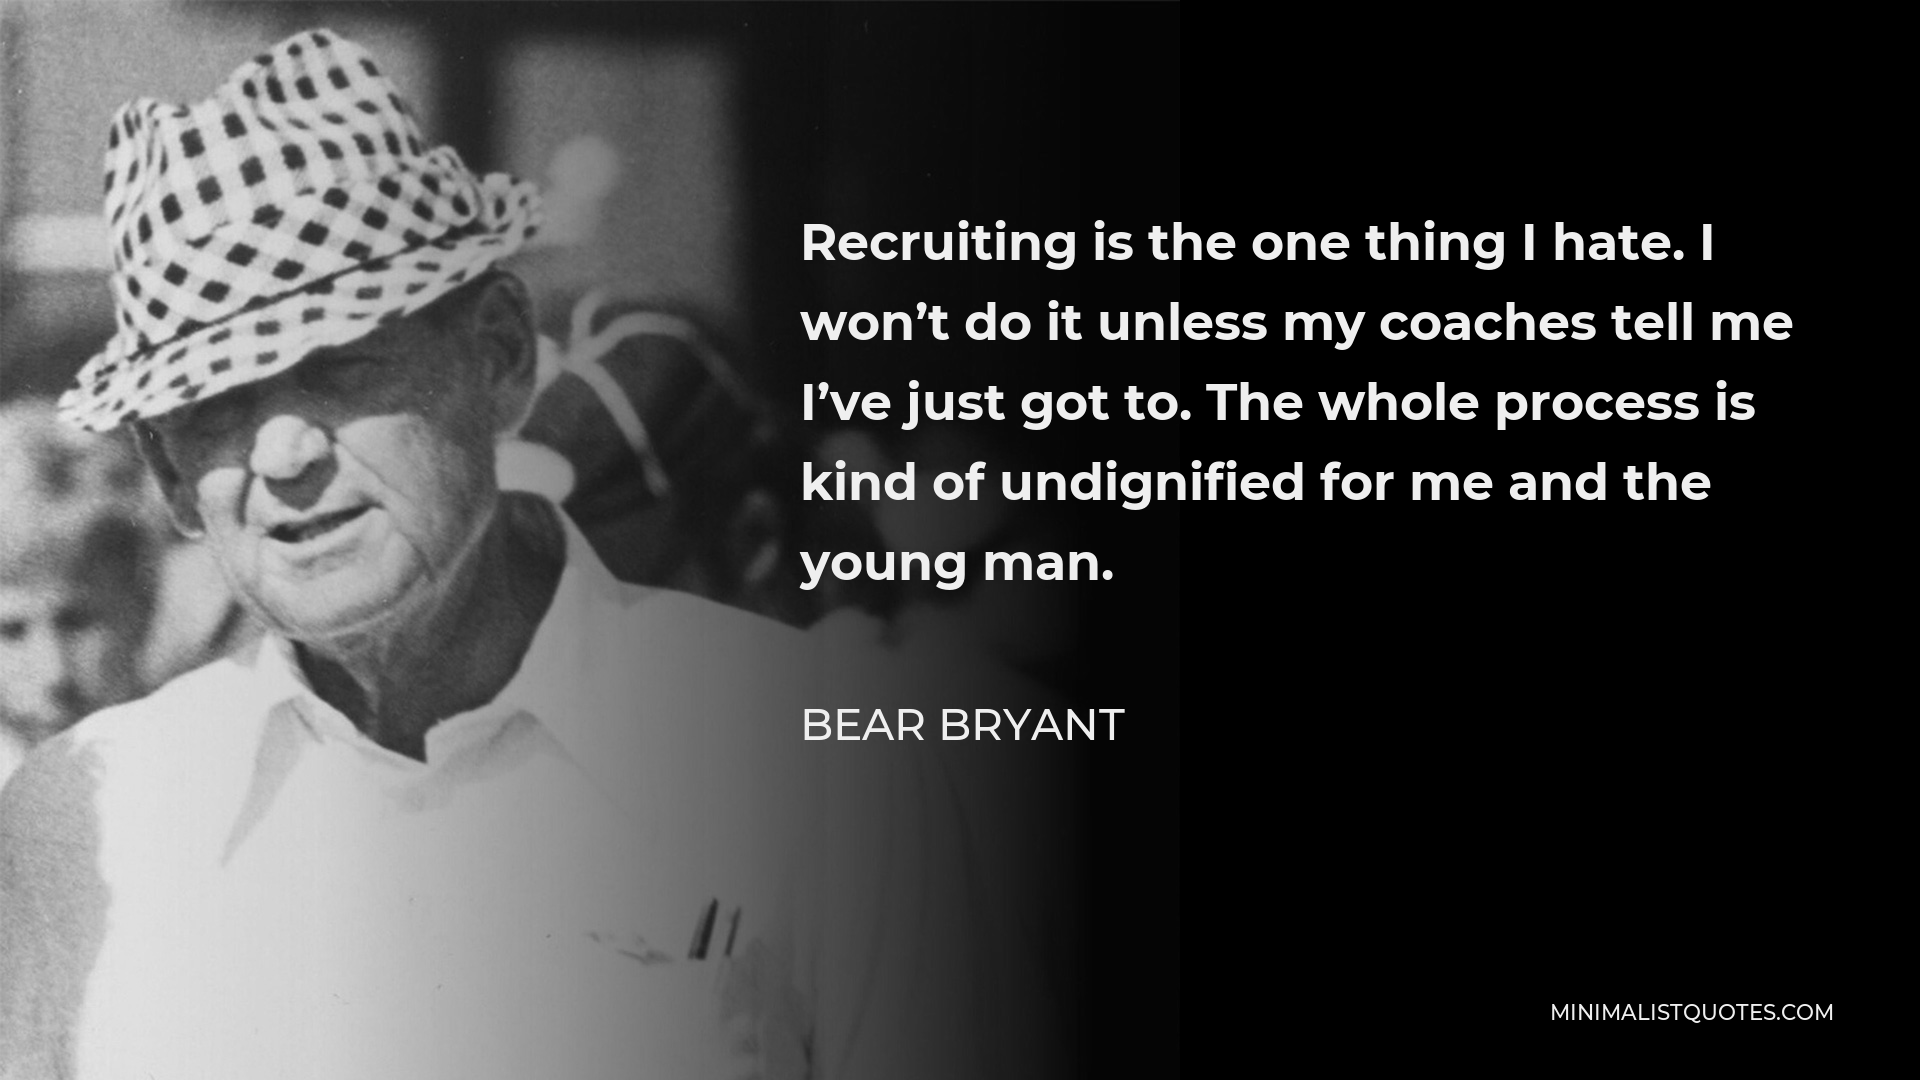 Bear Bryant Quote - Recruiting is the one thing I hate. I won’t do it unless my coaches tell me I’ve just got to. The whole process is kind of undignified for me and the young man.